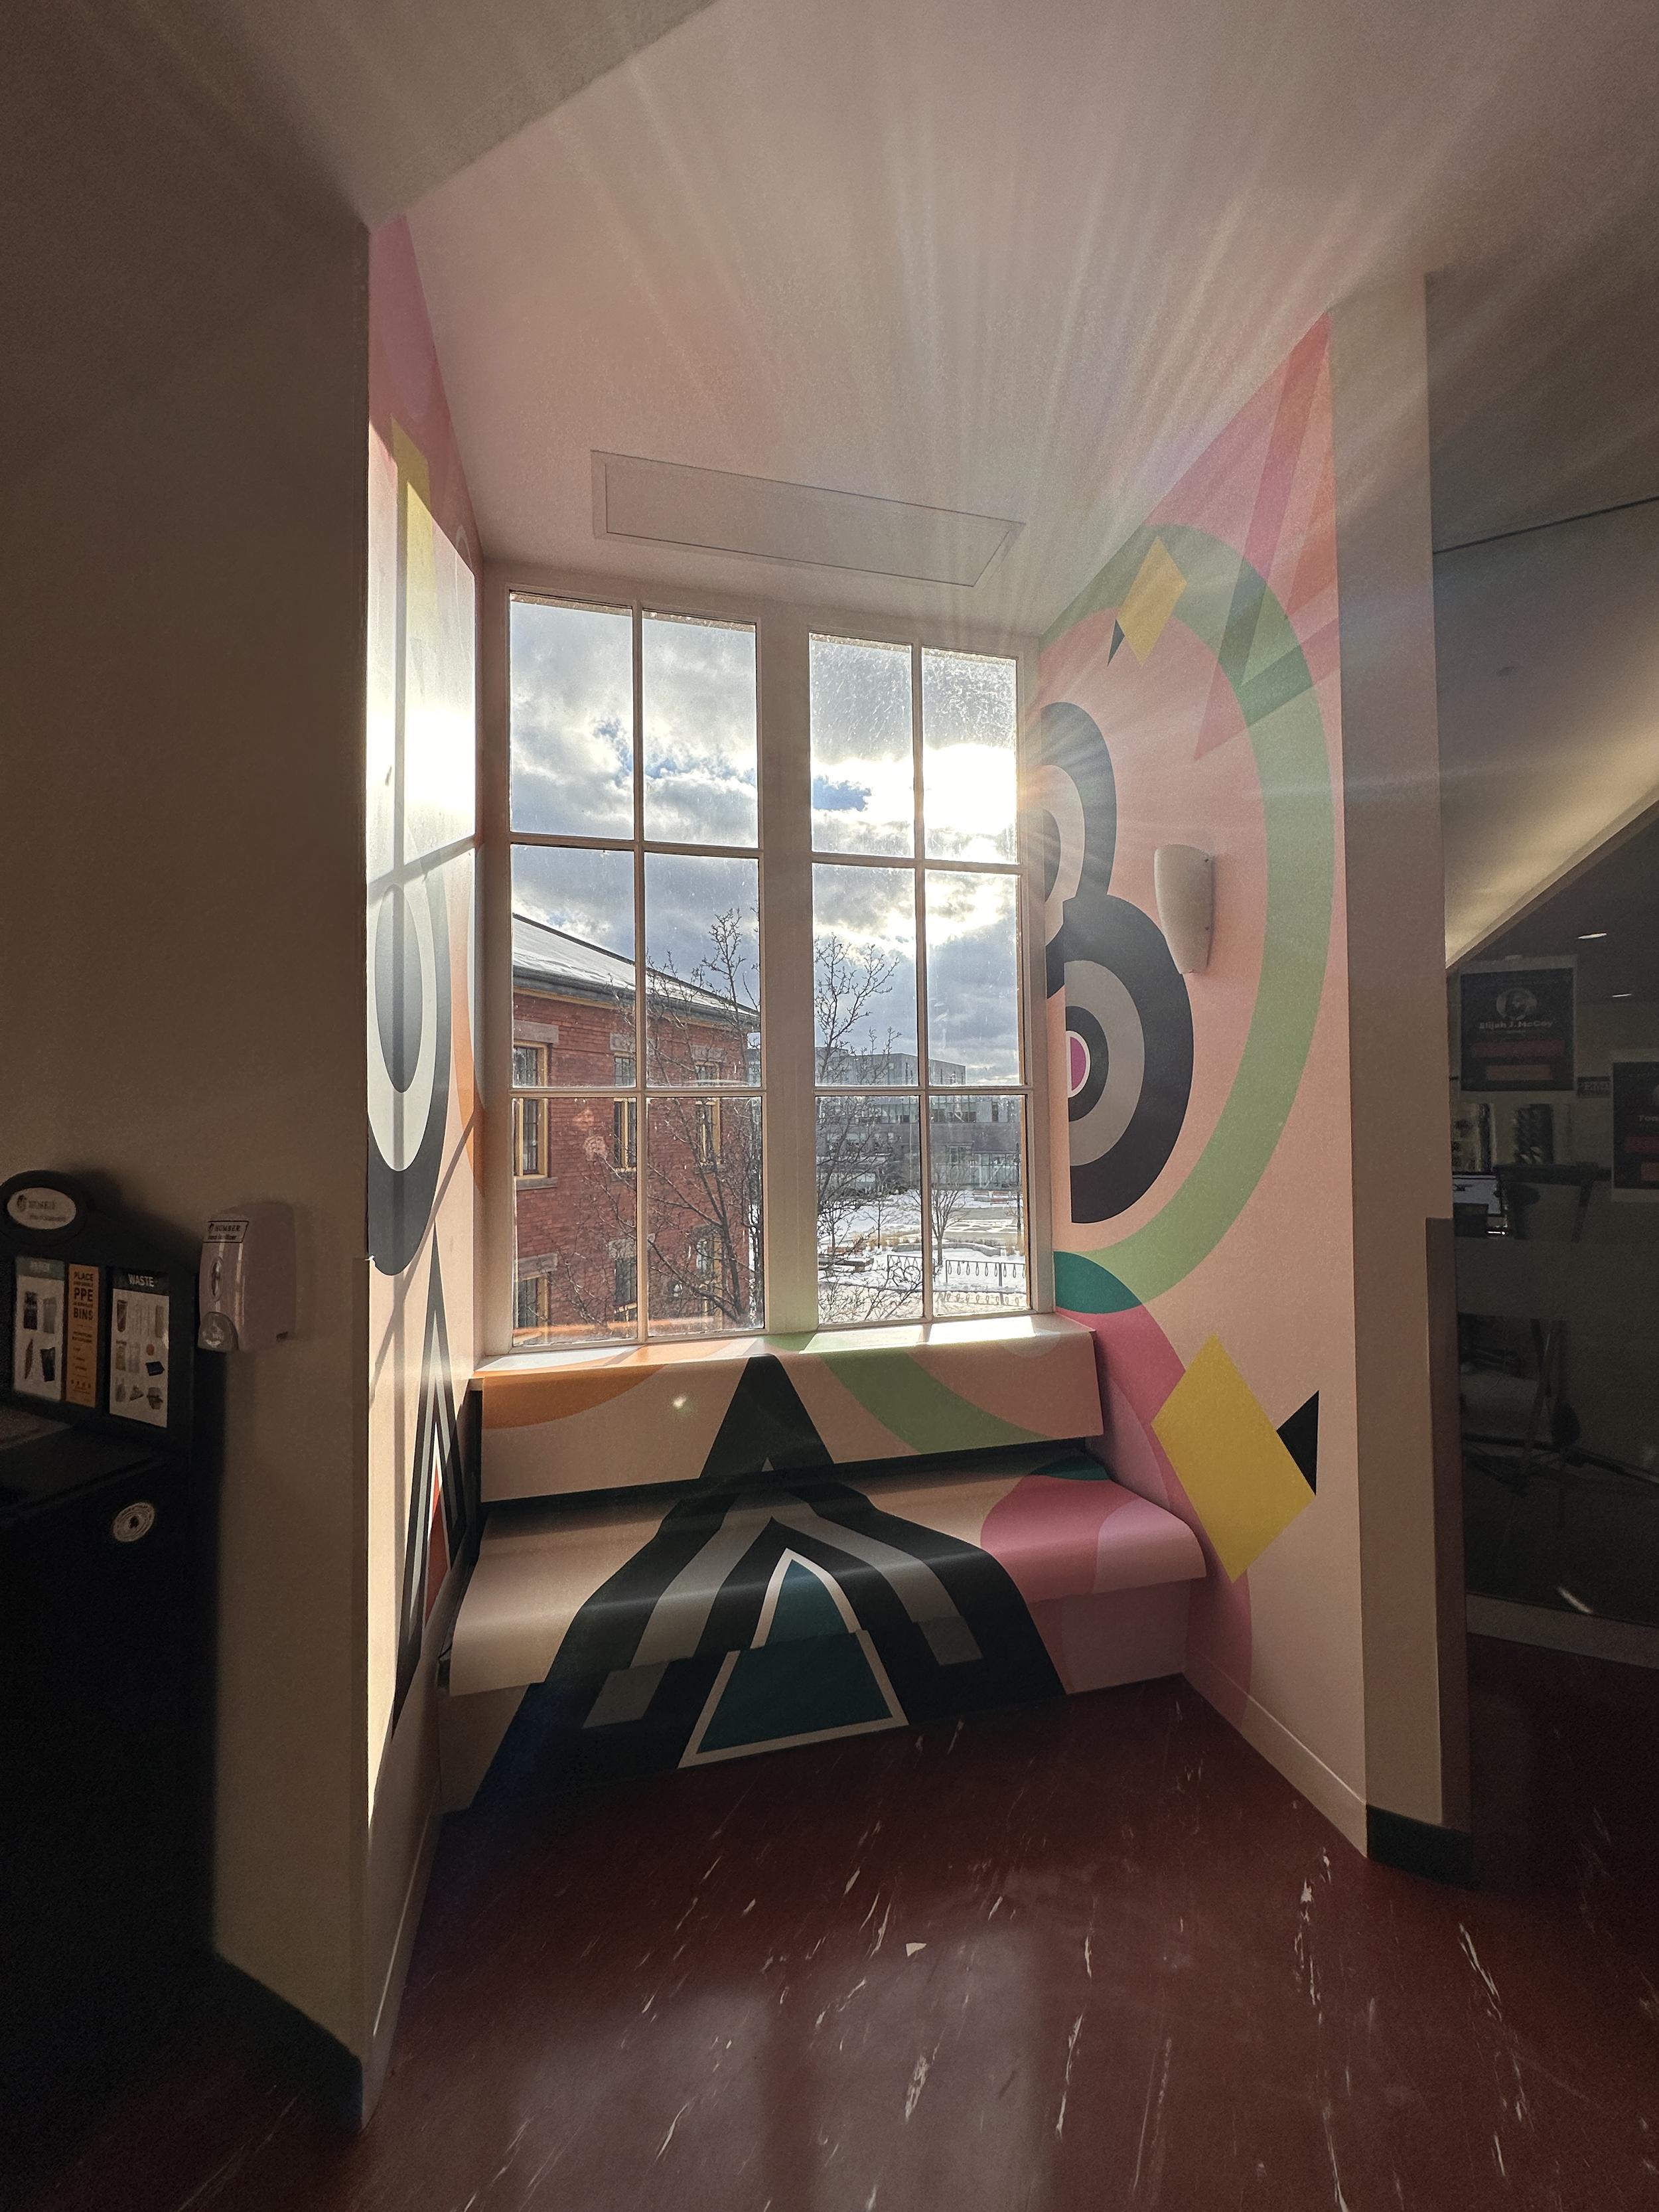 A mural is painted around a window, which is letting light in.